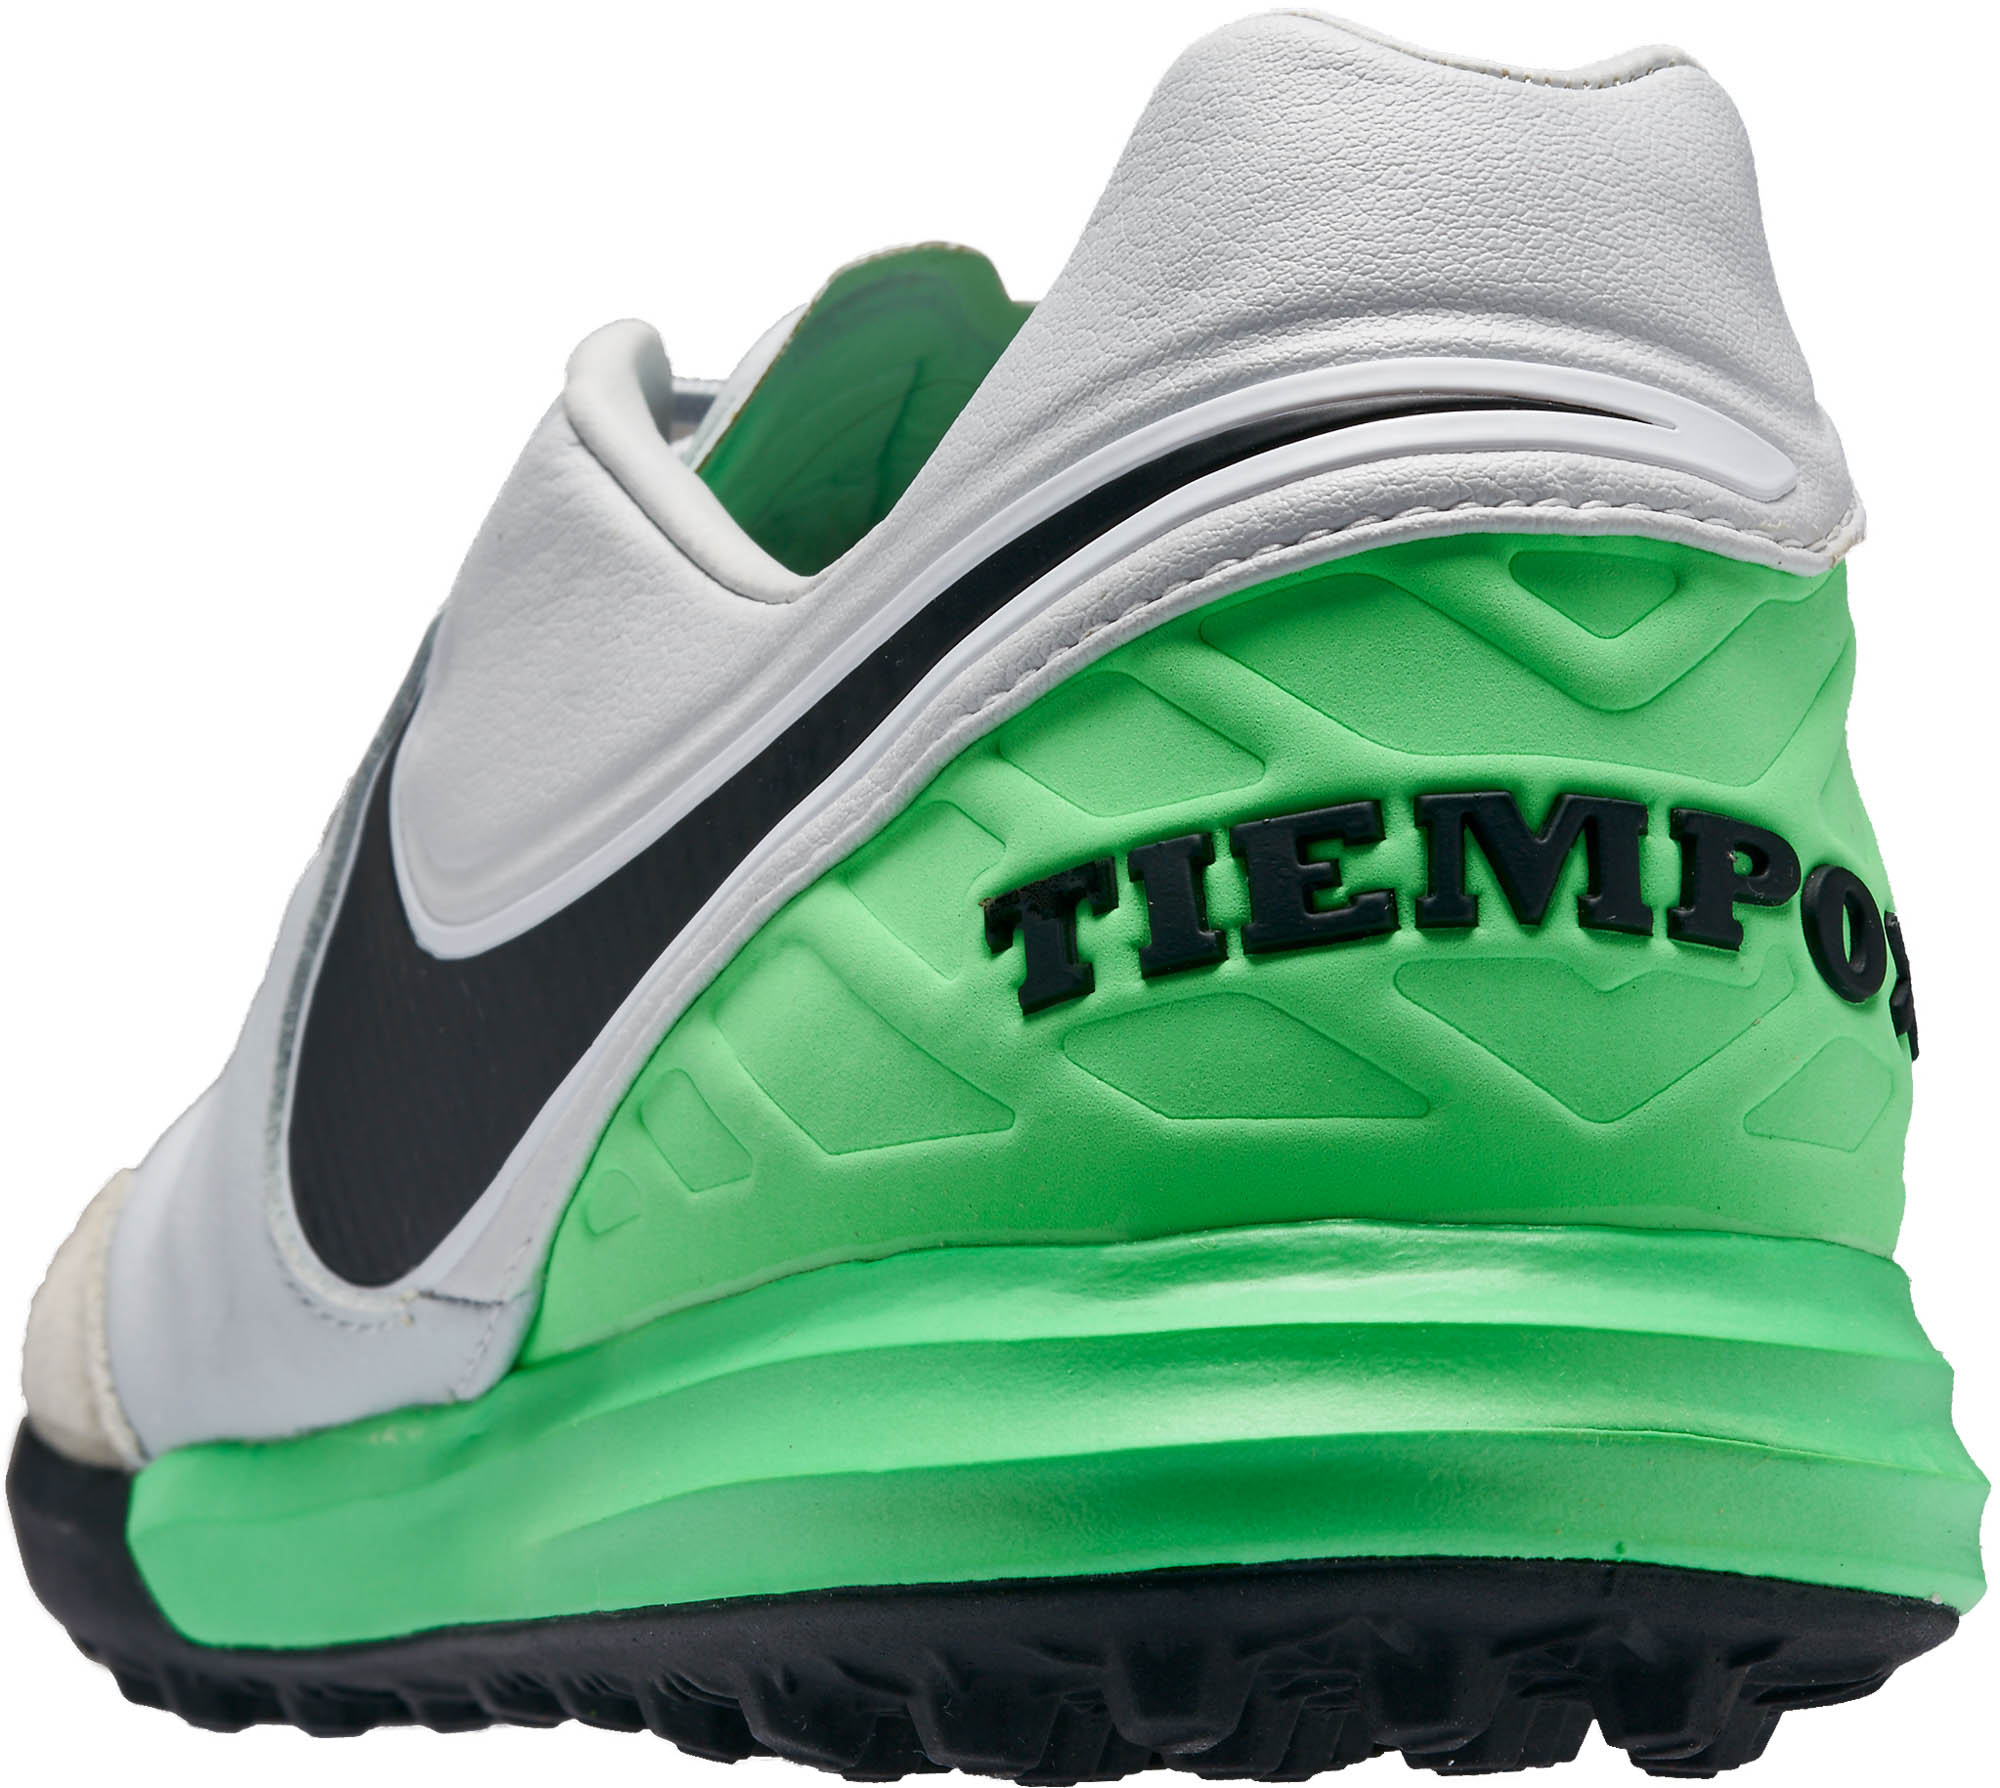 Plausible Hija Cívico Nike TiempoX Proximo TF Soccer Shoes - Nike SCCRX Shoes